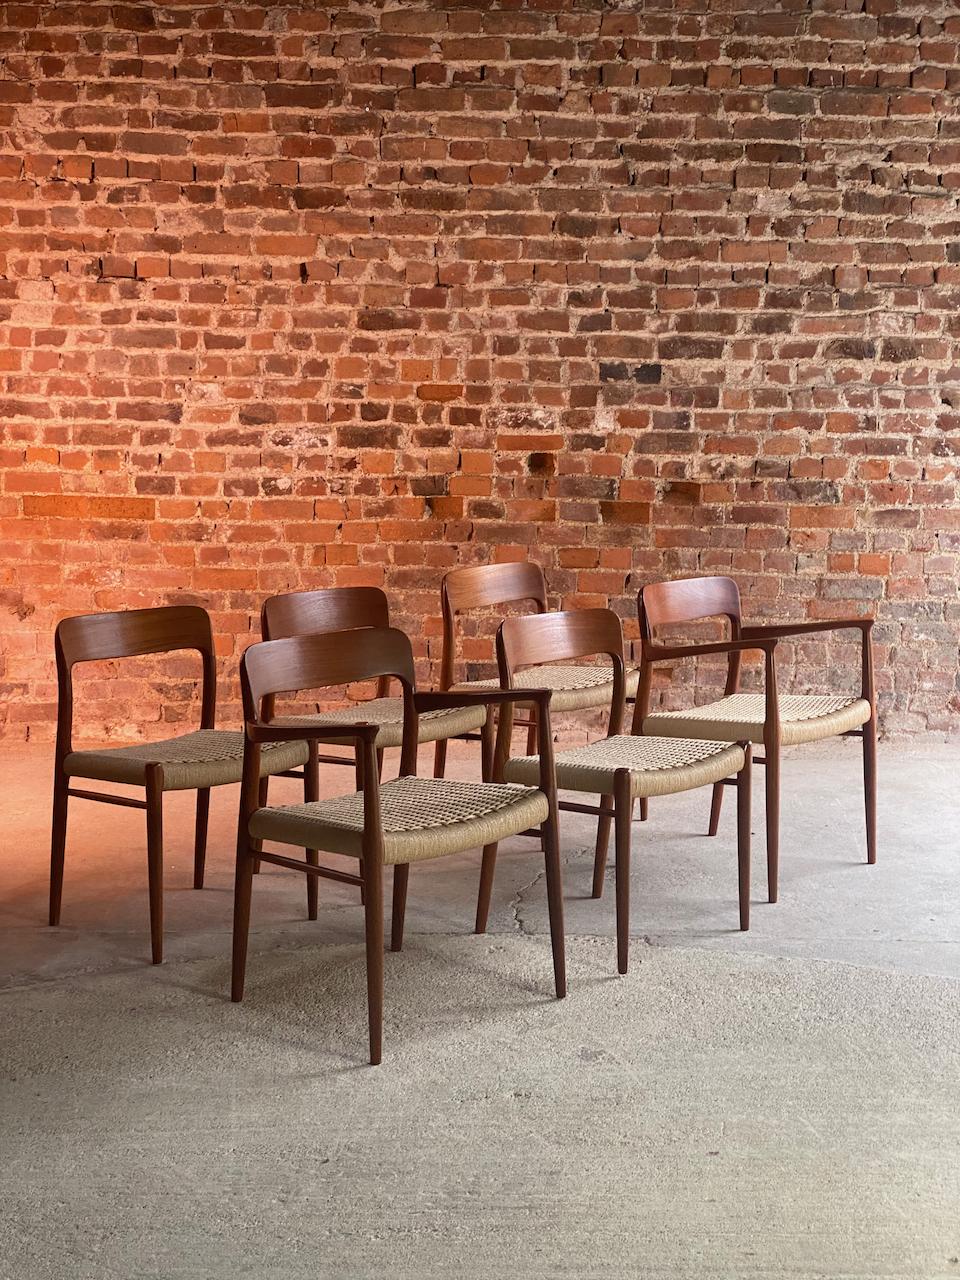 Niels Moller model 56 & model 75 teak & papercord dining chairs set of 6 1960

Magnificent set of six Niels Otto Møller Model 56 (2) and Model 75 (4) Teak & papercord dining chairs manufactured by J.L. Møllers Møbelfabrik Denmark, circa 1960,